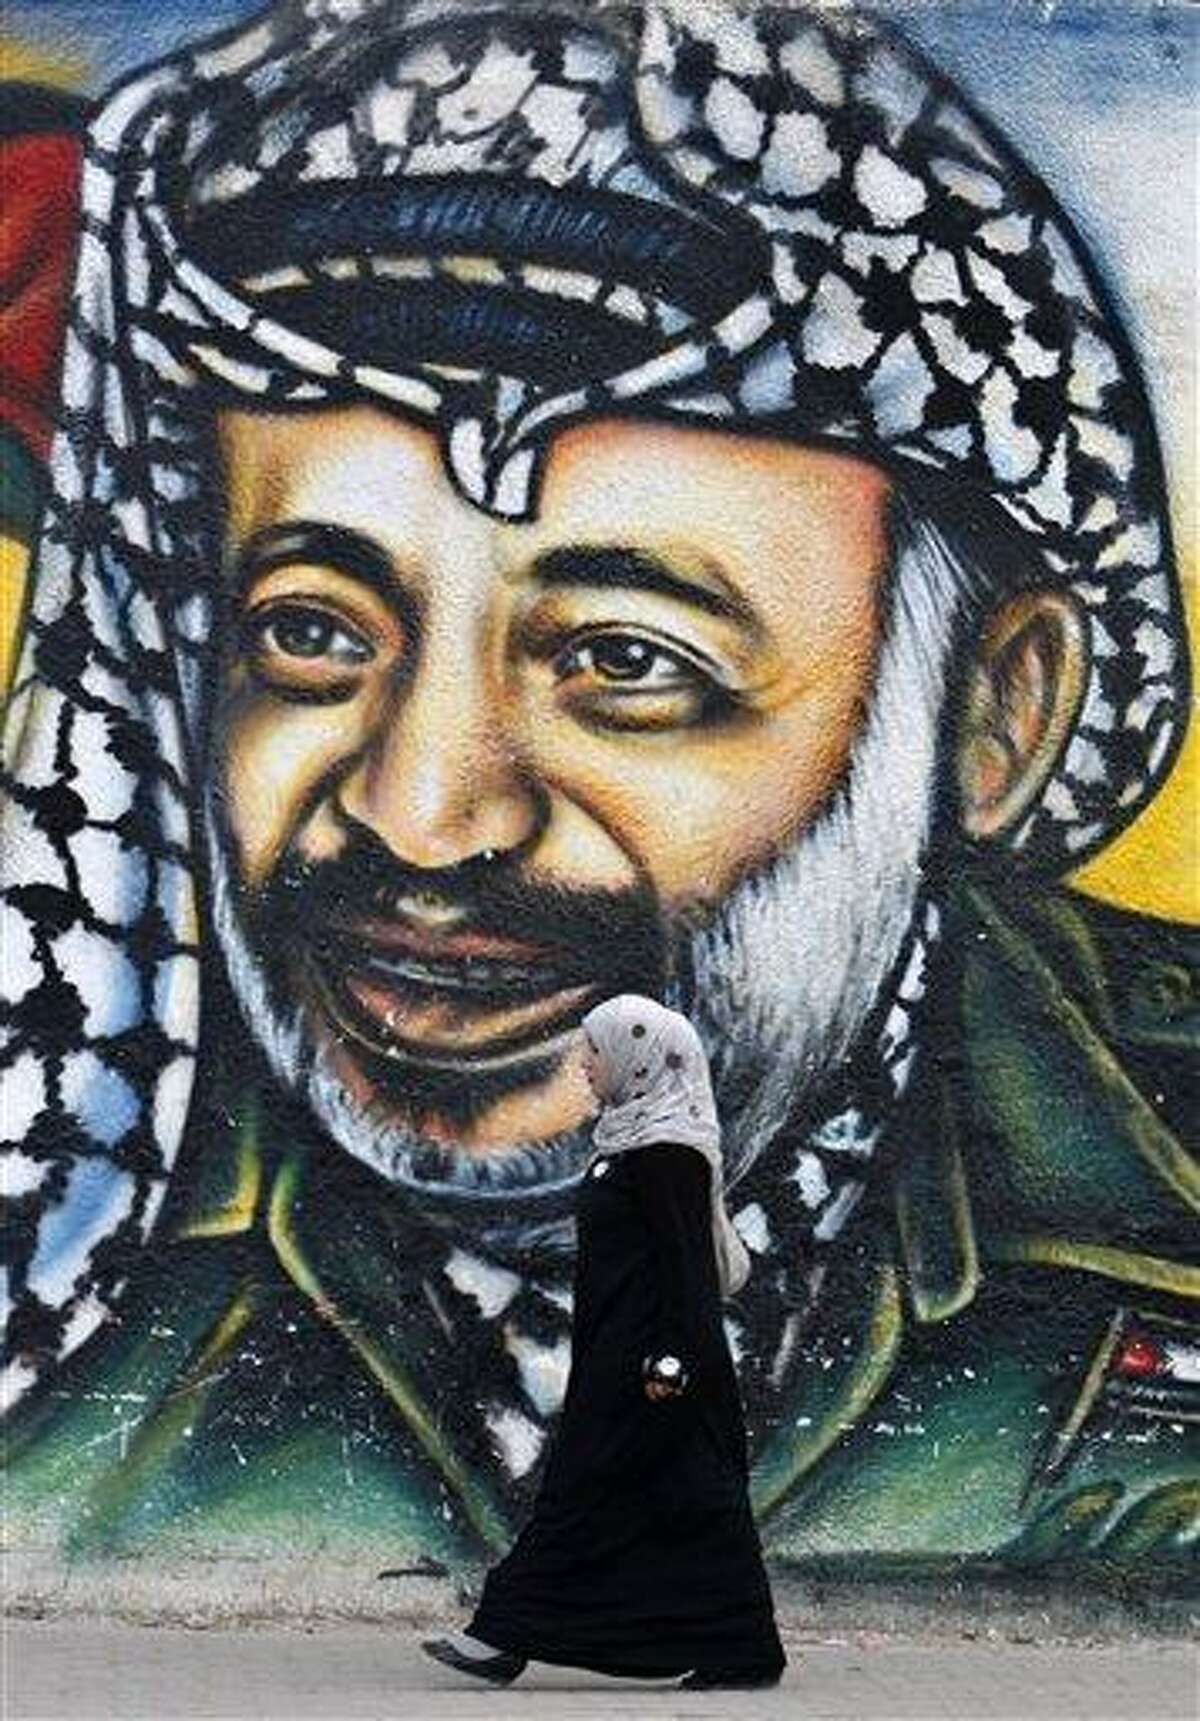 A Palestinian woman walks past a mural of late Palestinian leader Yasser Arafat, in Gaza City, Tuesday, Nov. 27, 2012. Palestinian authorities on Tuesday opened Yasser Arafat's grave and foreign experts took samples from his remains as part of a long-shot attempt, eight years after the iconic leader's mysterious death, to determine whether he was poisoned, as relatives and some political successors have claimed. (AP Photo/Adel Hana)